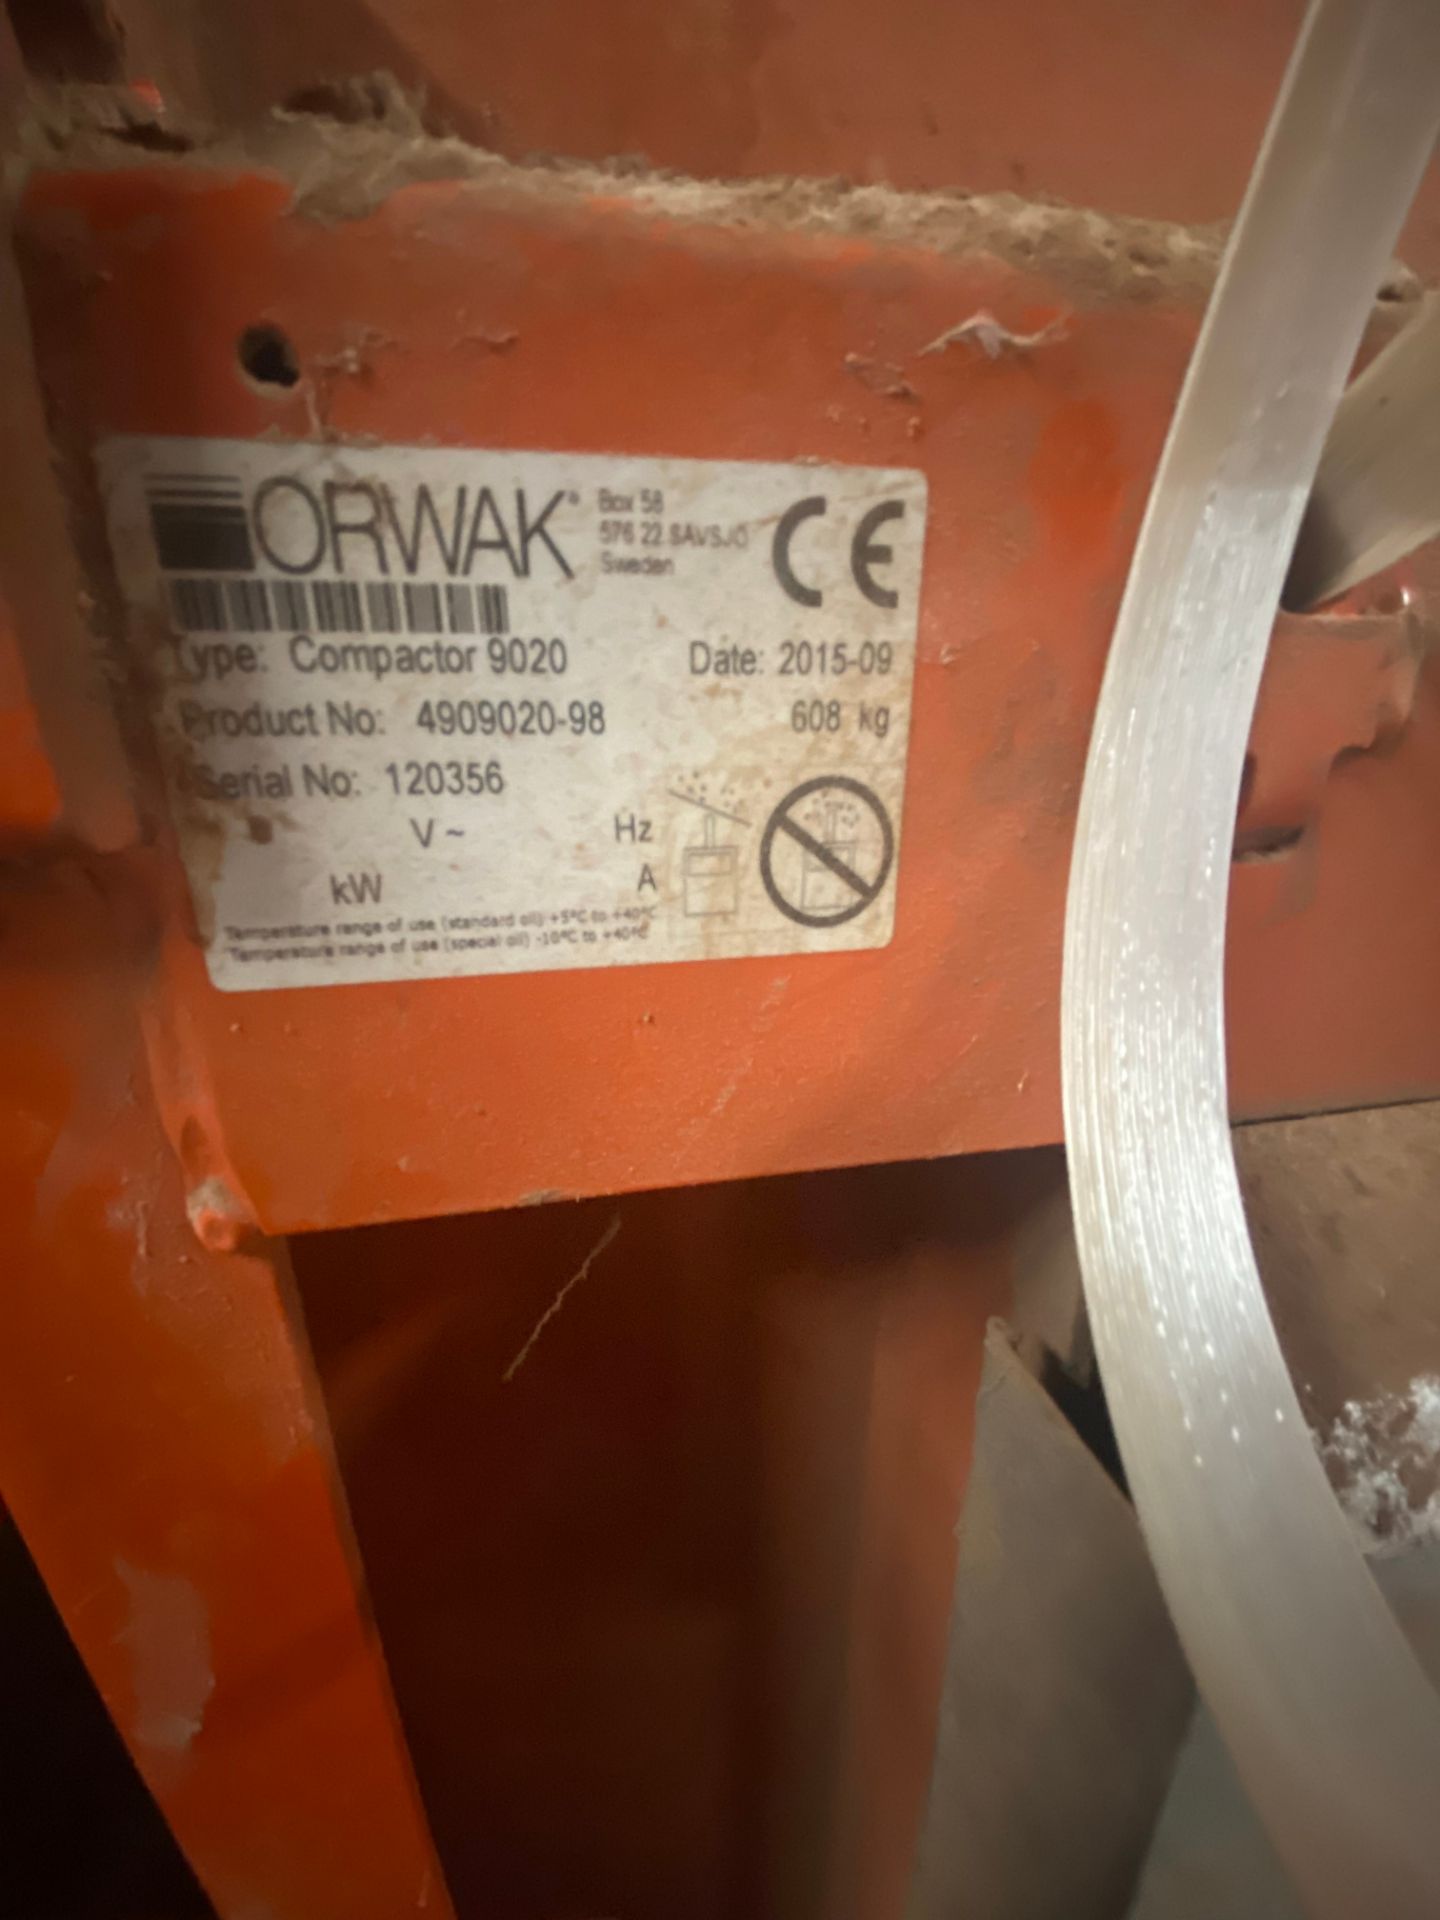 2015 Orwak 3-Section Compactor, Type Compactor 9020, S/N 120356 (LOCATED IN BALTIMORE, MD) (Loading, - Bild 4 aus 5